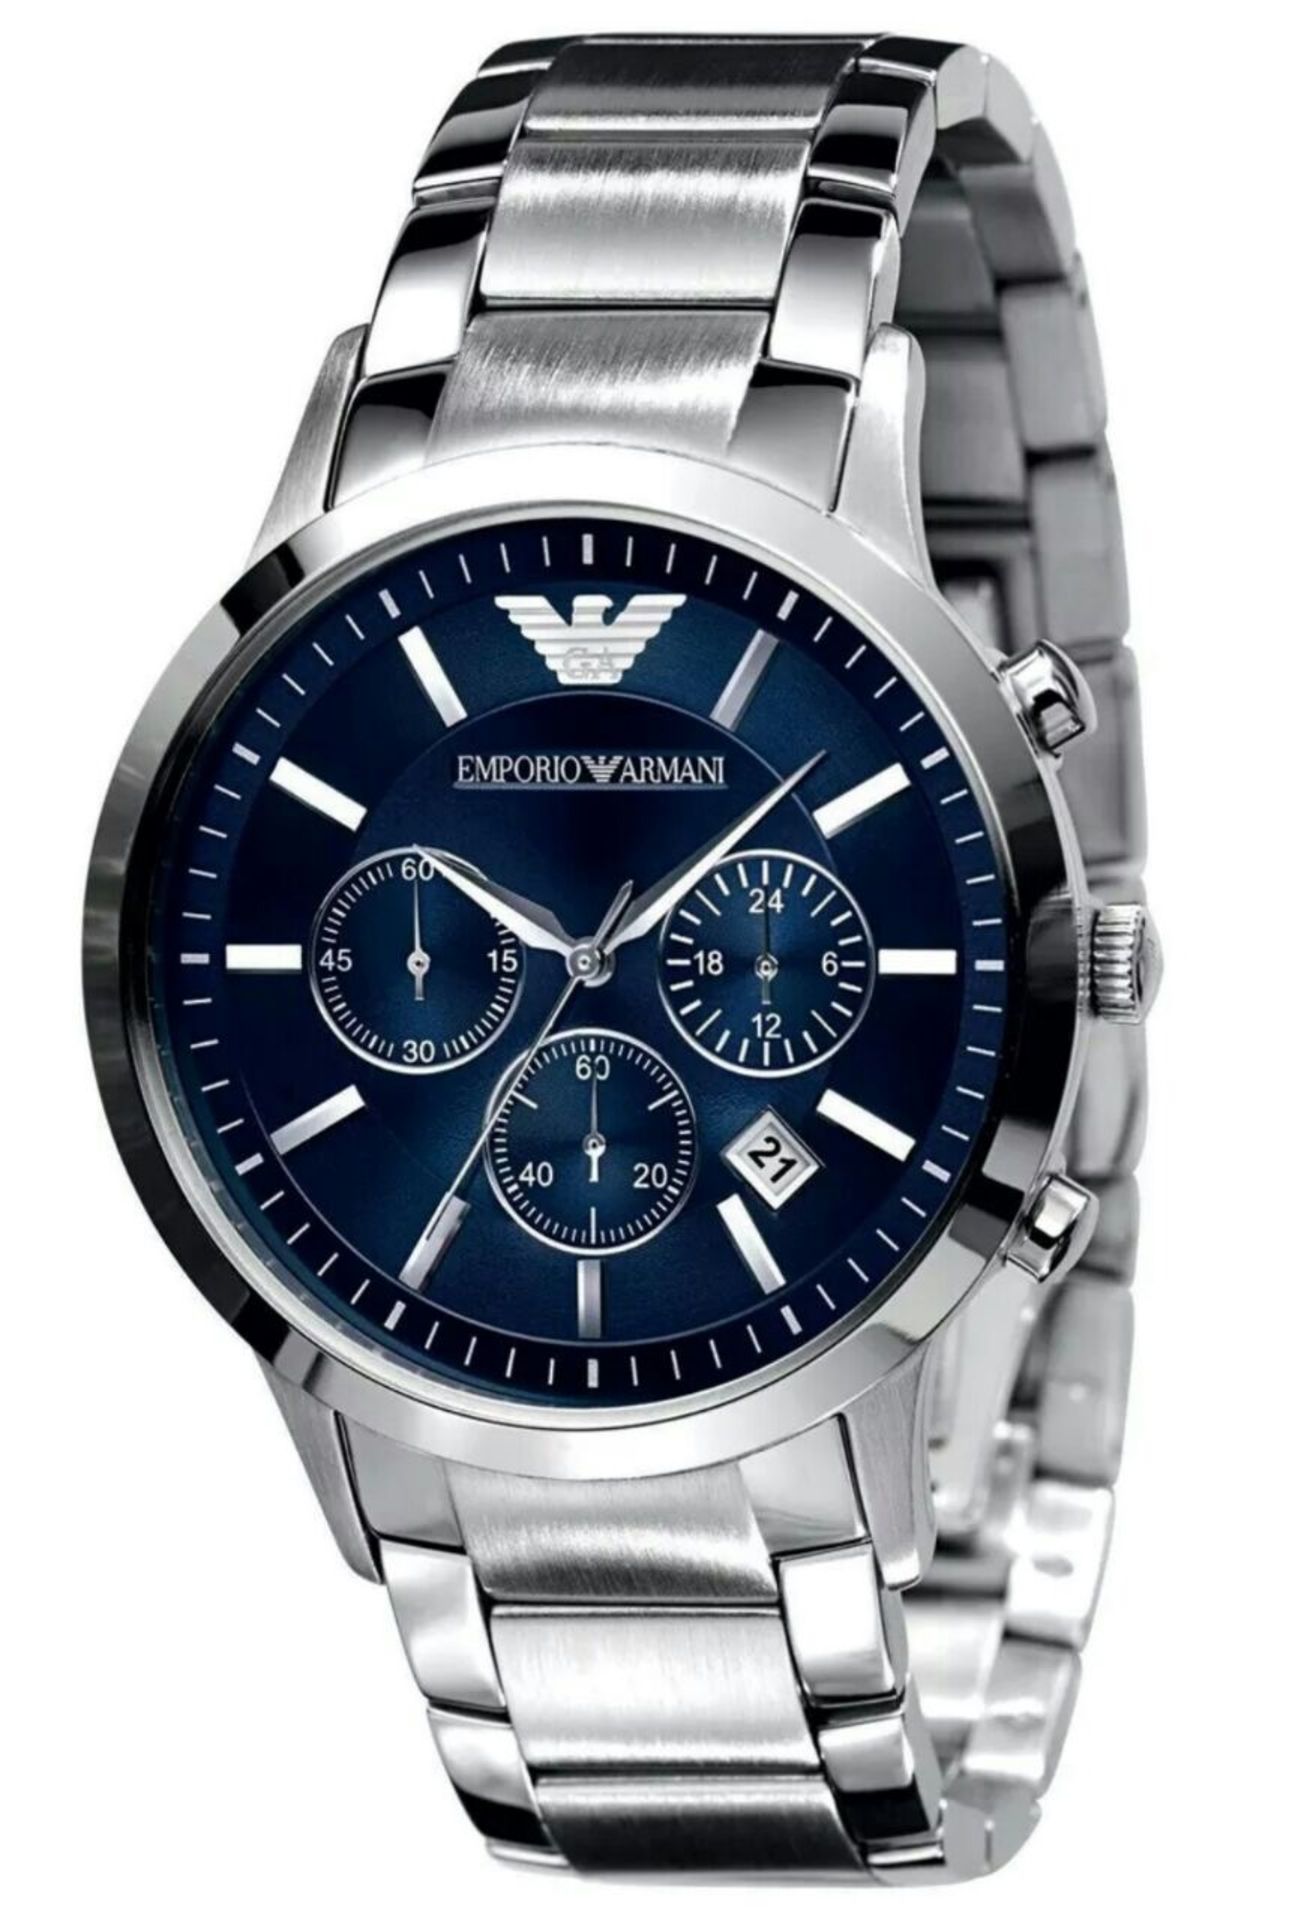 BRAND NEW EMPORIO ARMANI AR2448, GENTS POLISHED STAINLESS STEEL BRACELET WATCH, WITH BLUE CIRCULAR